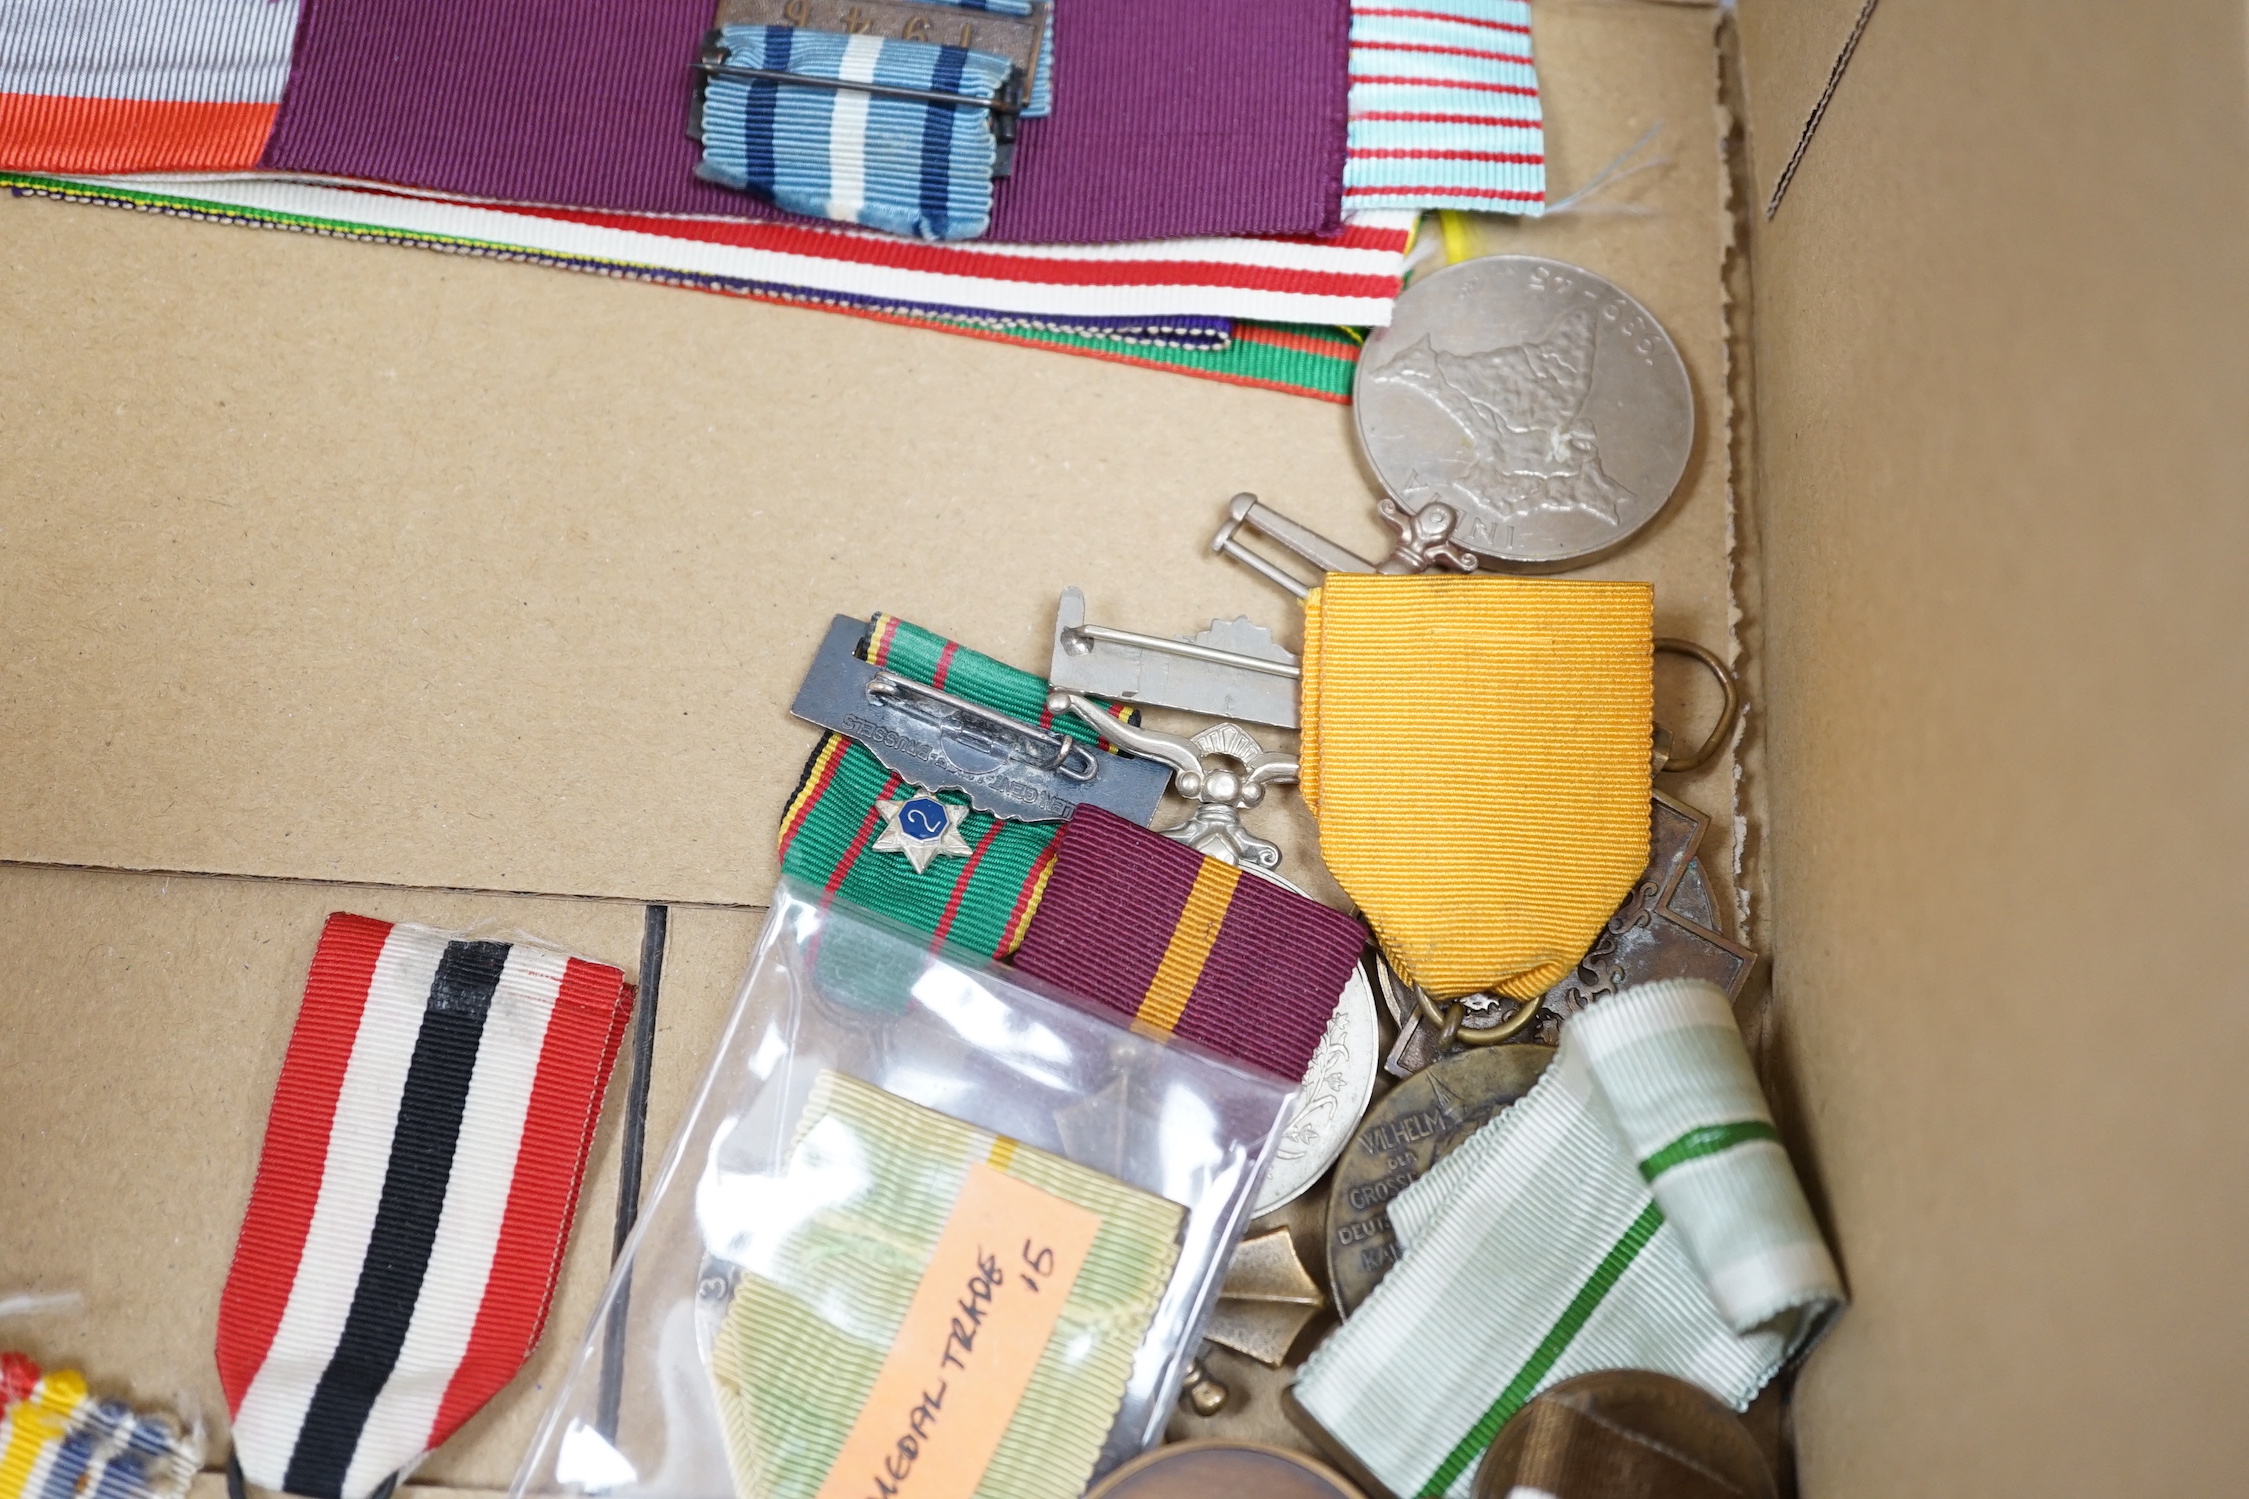 Thirty world military and commemorative medals including; a Belgium War Aid Medal 1914-18, Nigeria Republic Medal, Austri-Hungarian Medal for Bravery, Kuwaiti Liberation Medal, Pakistan Resolution Day Medal, etc.